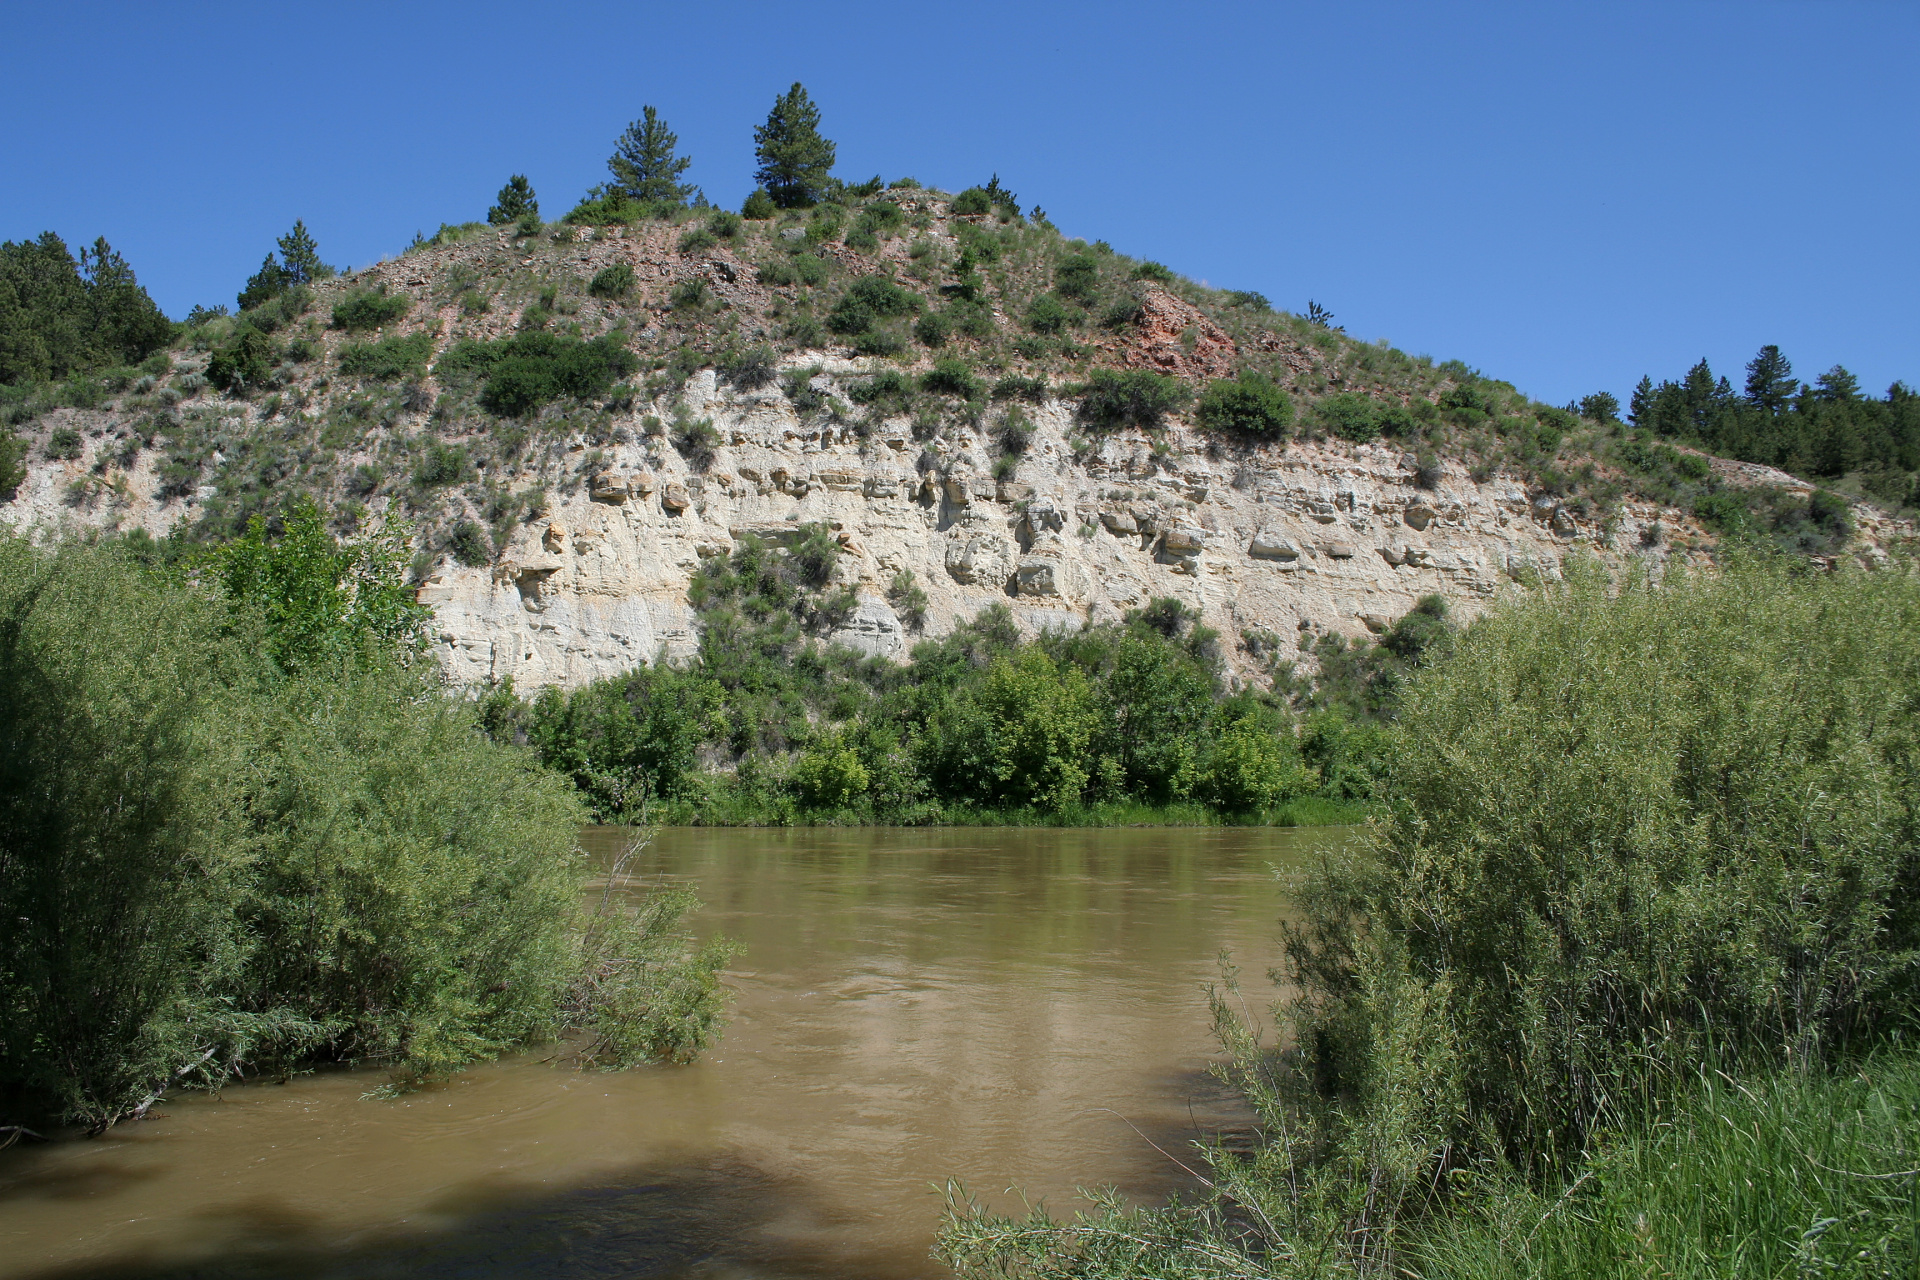 Hill by Tongue River (Travels » US Trip 2: Cheyenne Epic » The Rez » Ashland and Tongue River)